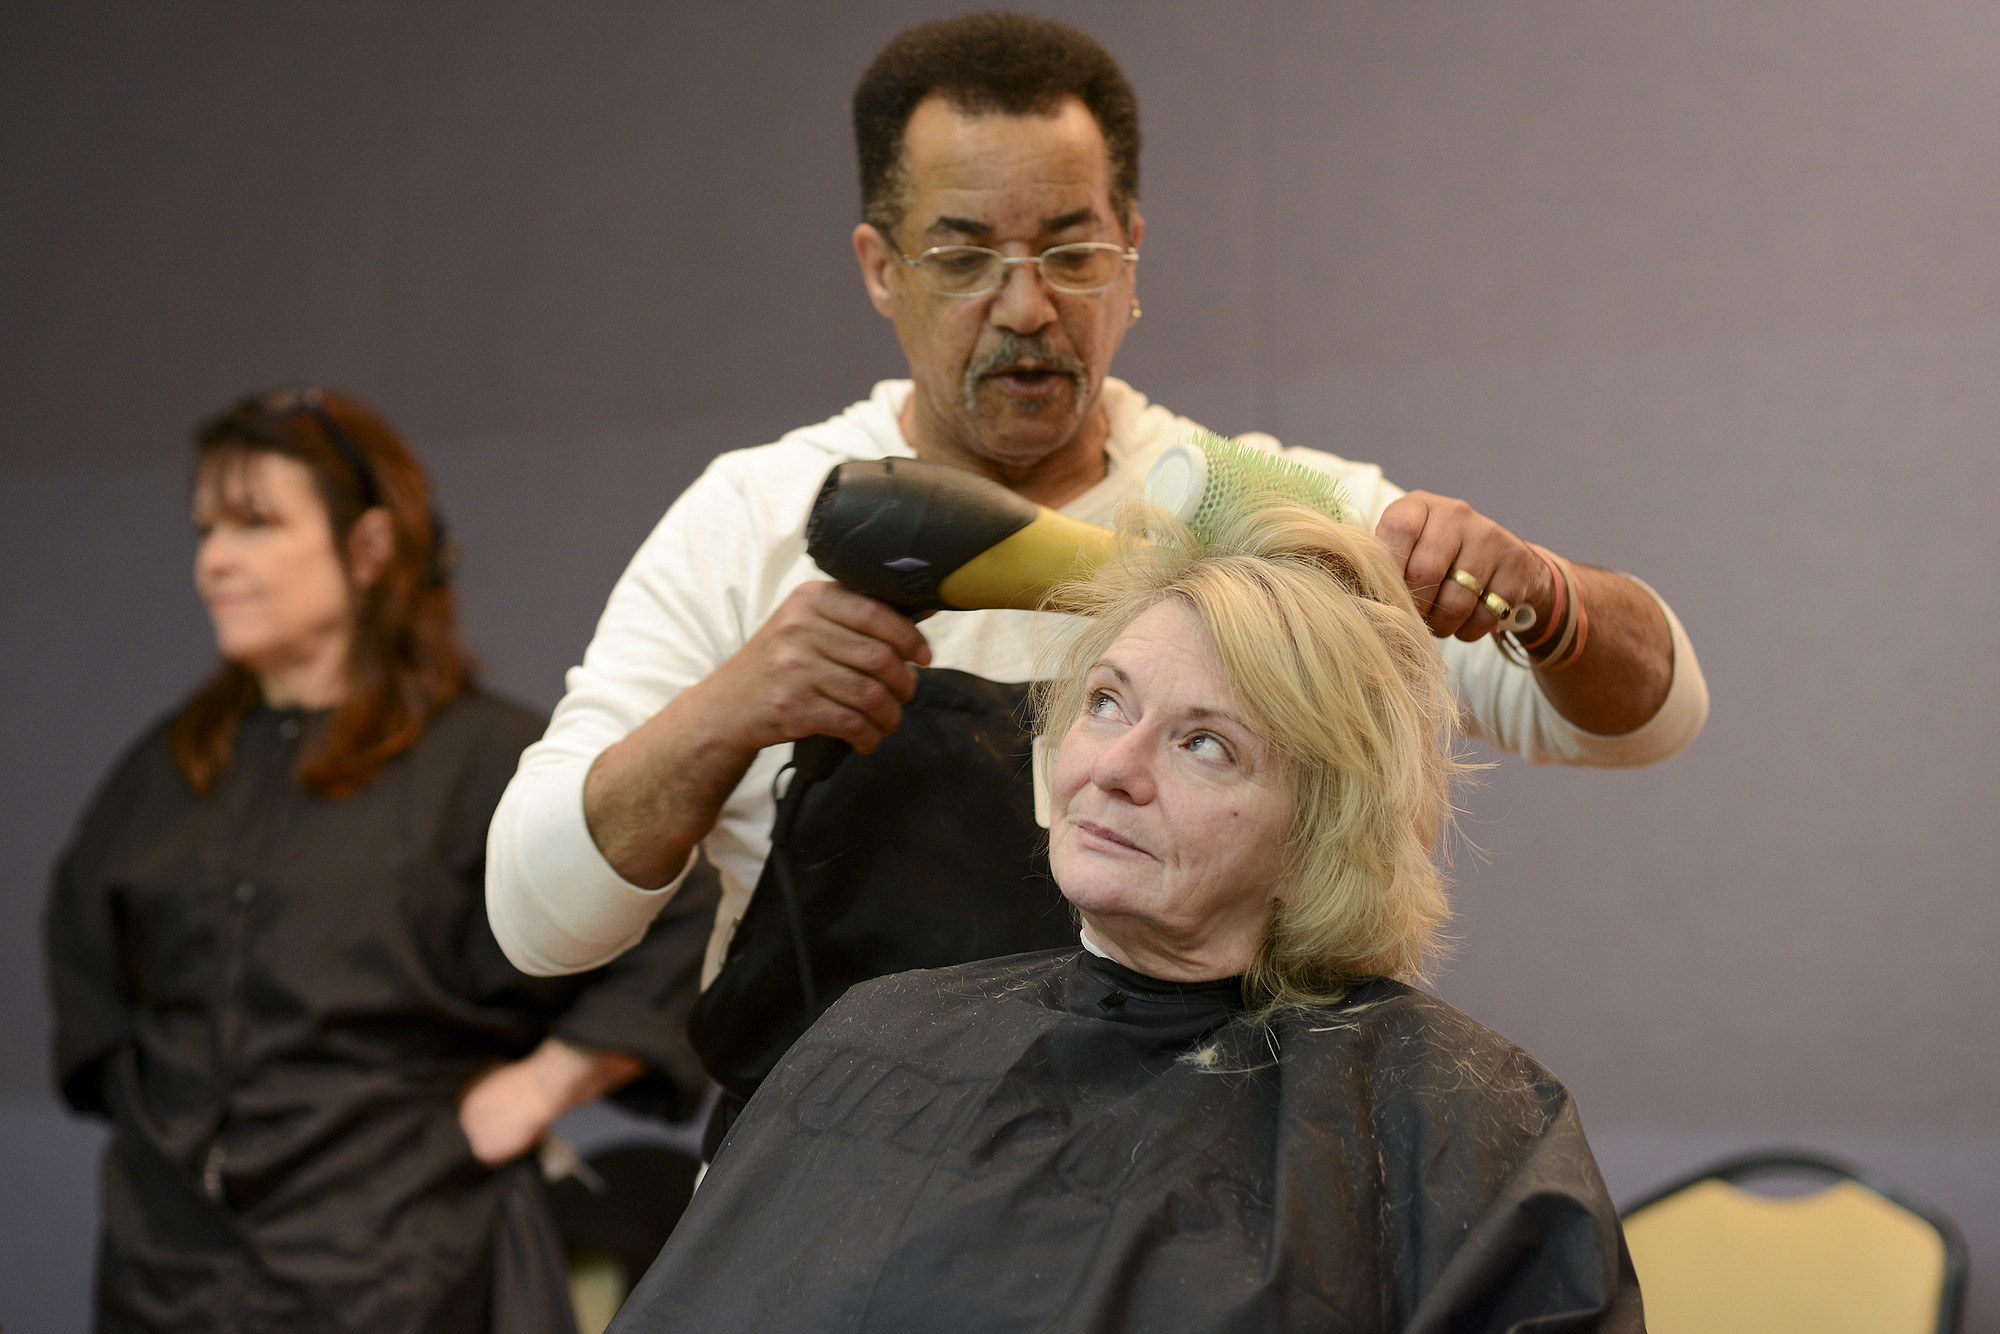 Photos by Ariane Kunze/The Columbian
Carmen Dean gets her hair cut and styled by Derek Thompson on Thursday at Project Homeless Connect at St. Joseph Catholic Church in Vancouver. Dean attended the annual event to receive mental health services, a flu shot and some new clothes, she said.